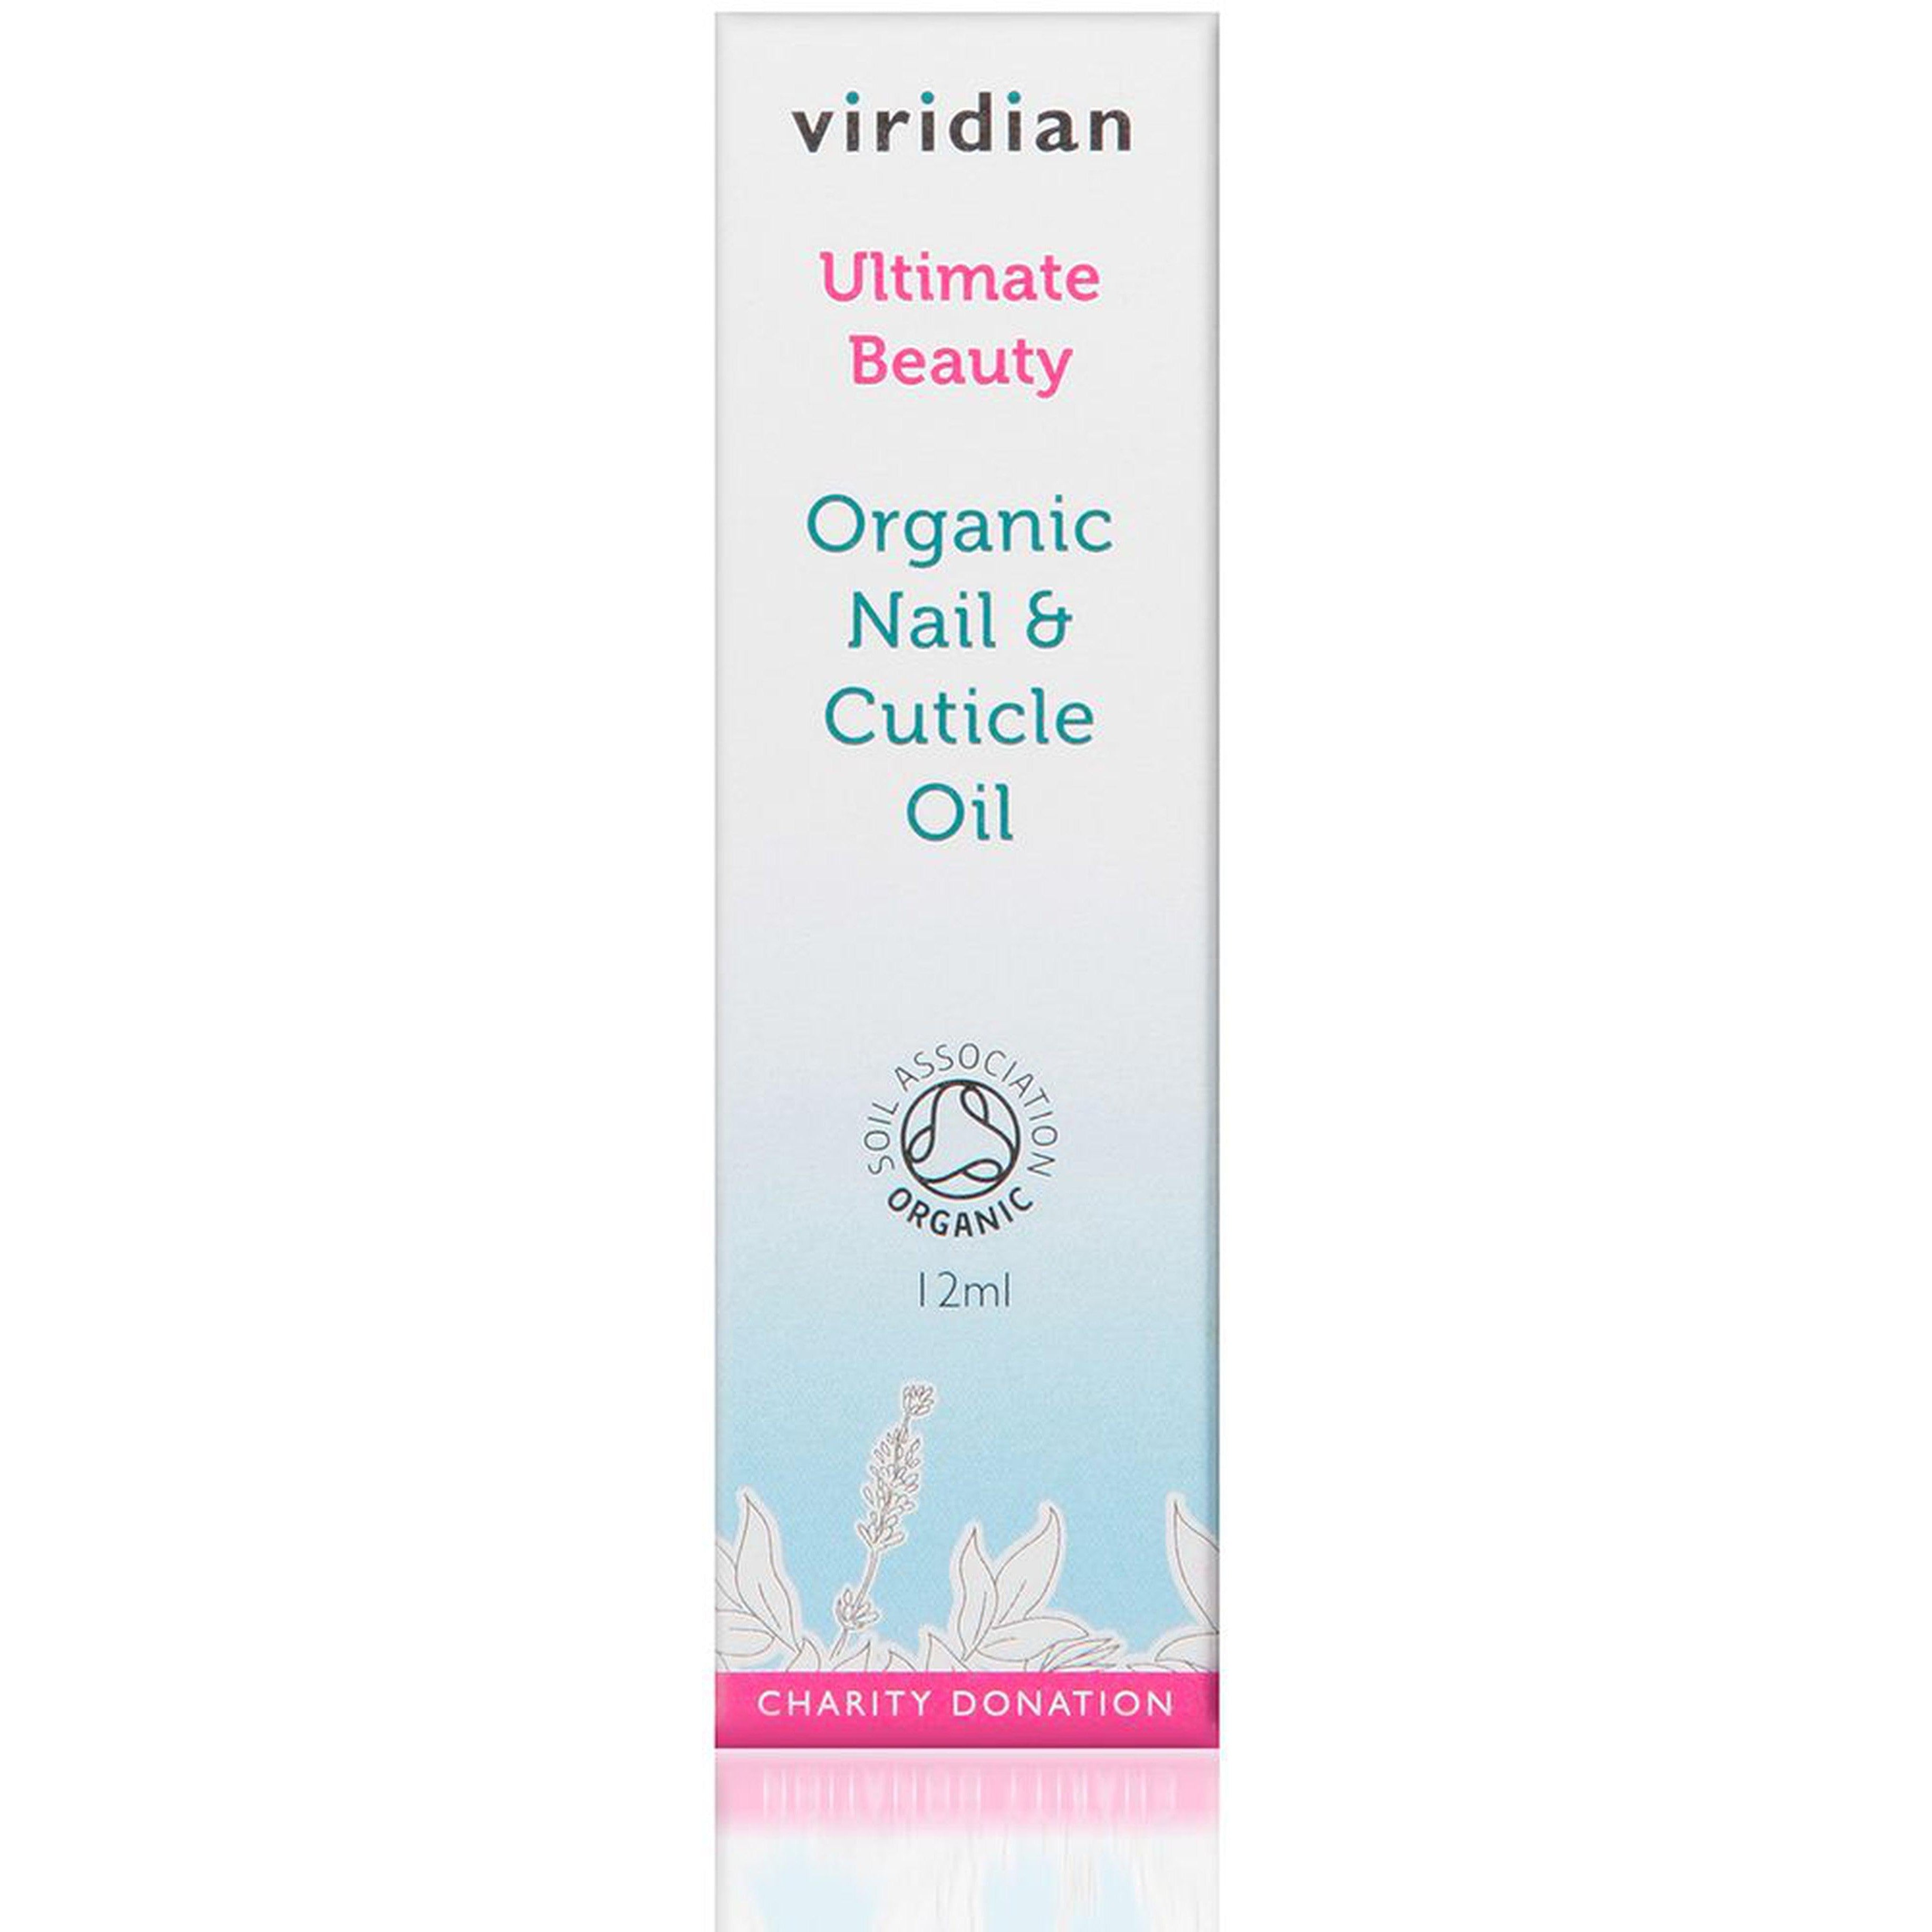 Viridian Organic Ultimate Beauty Nail & Cuticle Oil 12ml- Lillys Pharmacy and Health Store